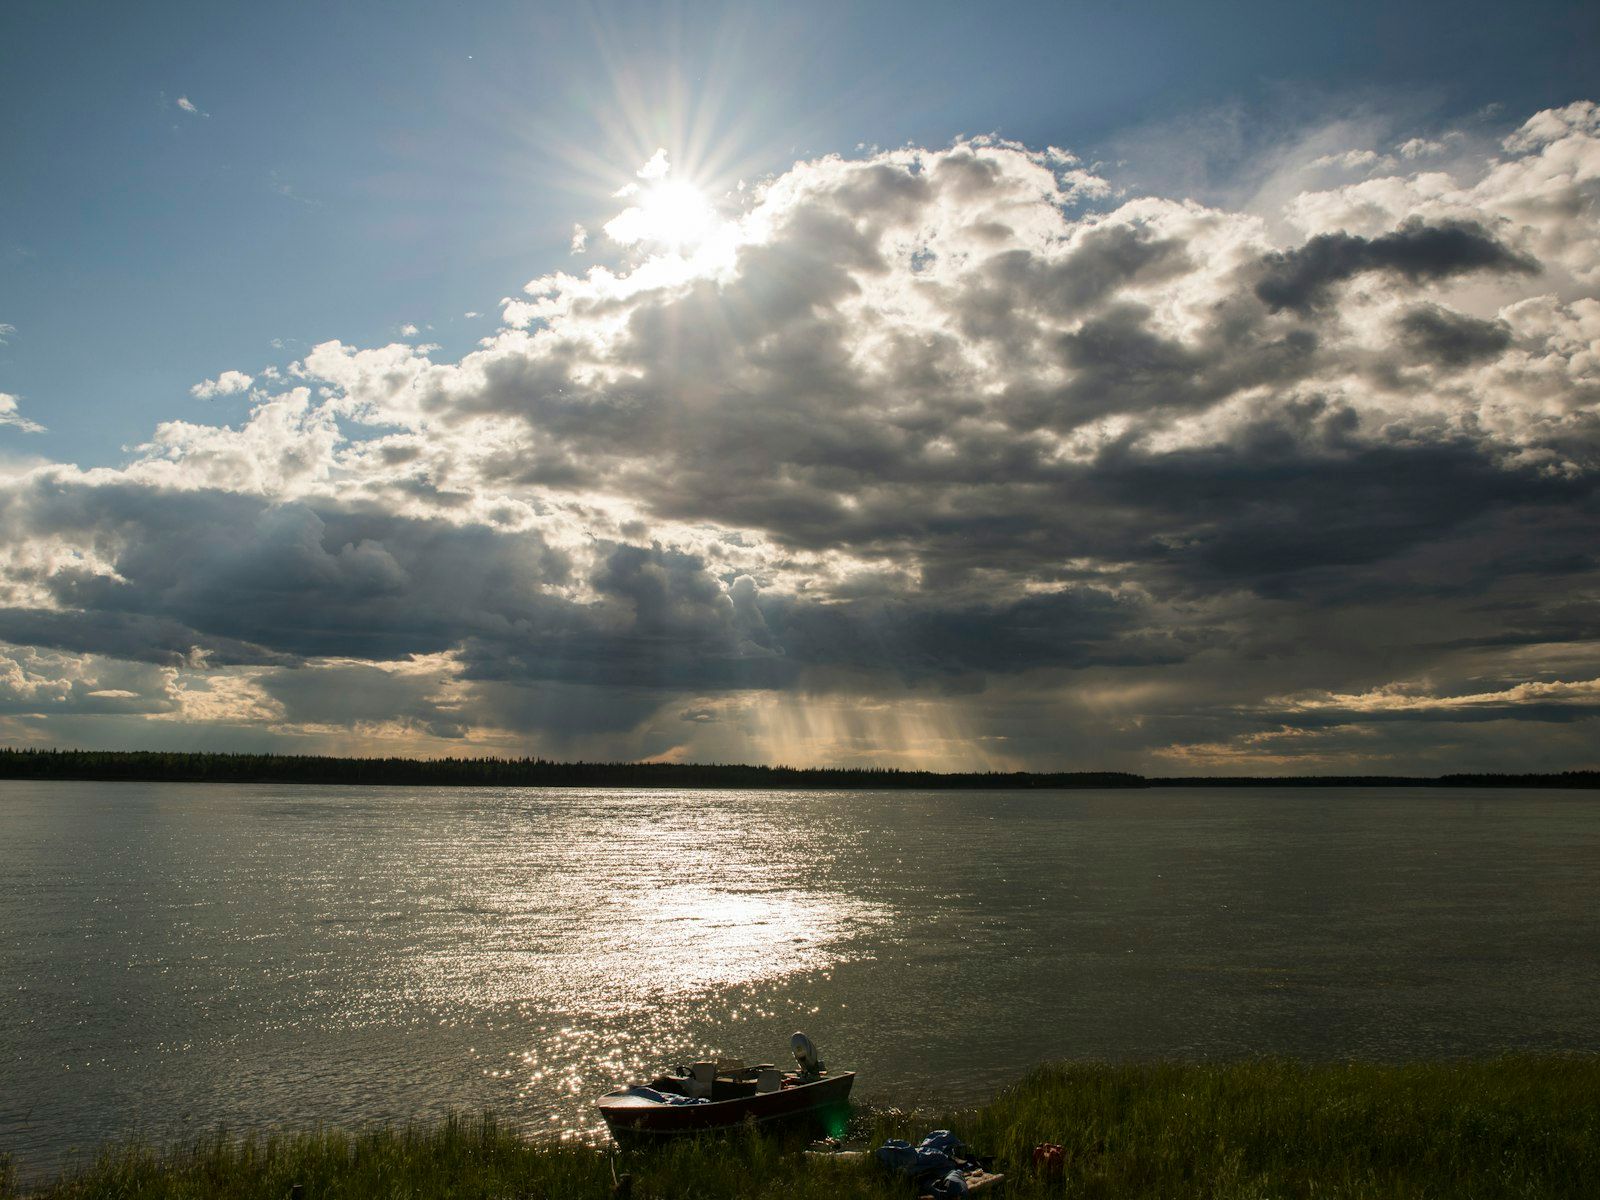 Sun peaking out from behind clouds over a boat on the shoreline of a lake